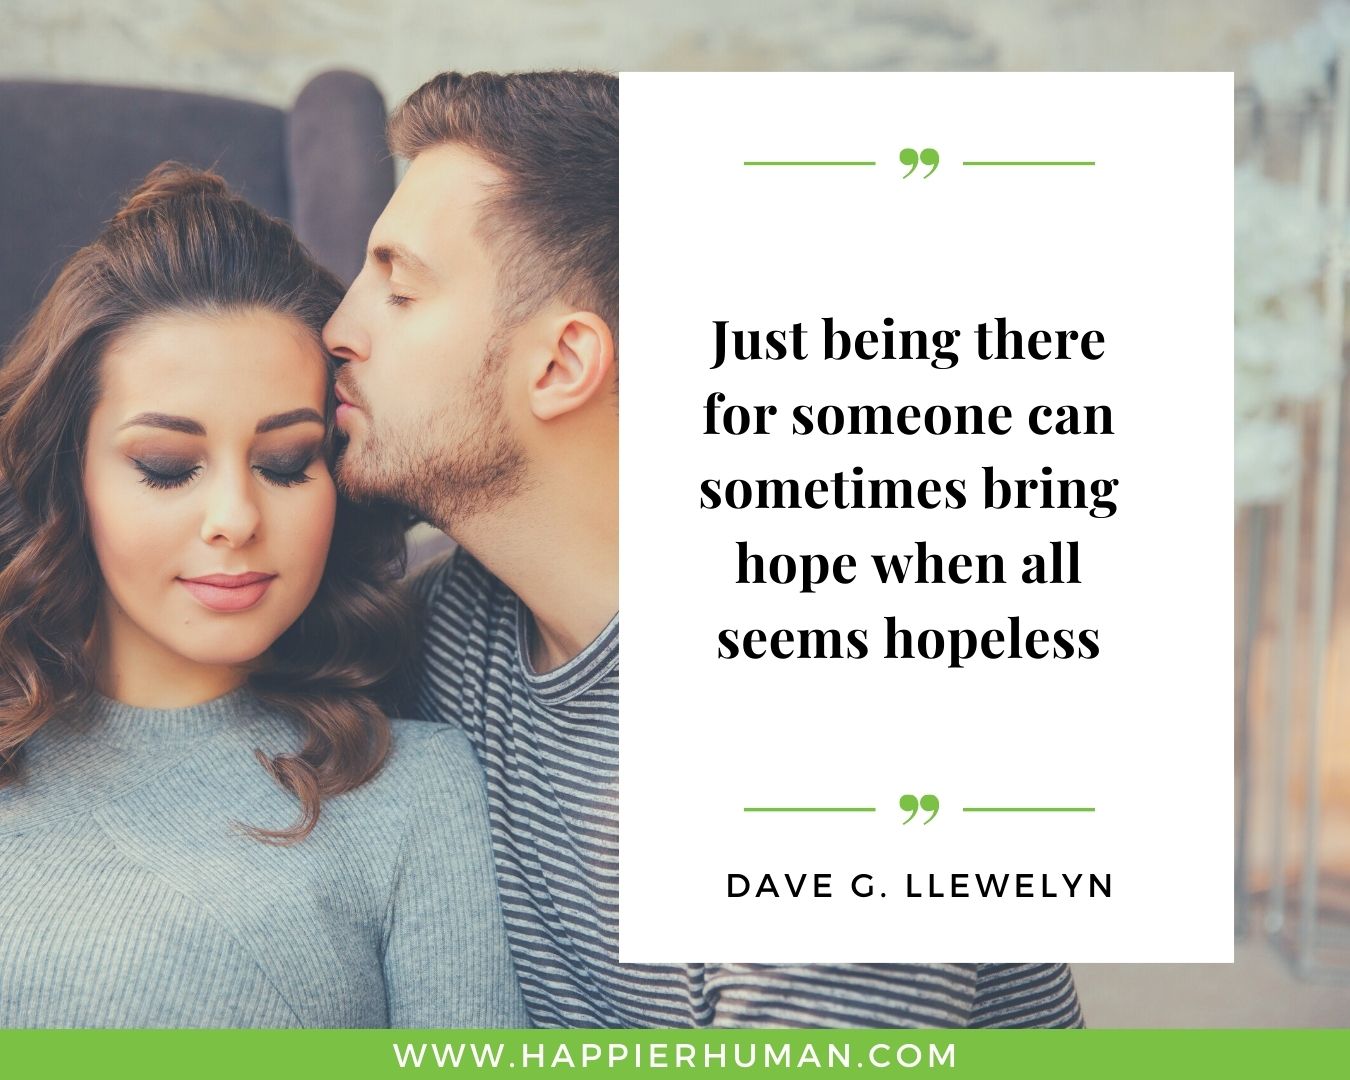 I’m Here for You Quotes - “Just being there for someone can sometimes bring hope when all seems hopeless.” – Dave G. Llewelyn